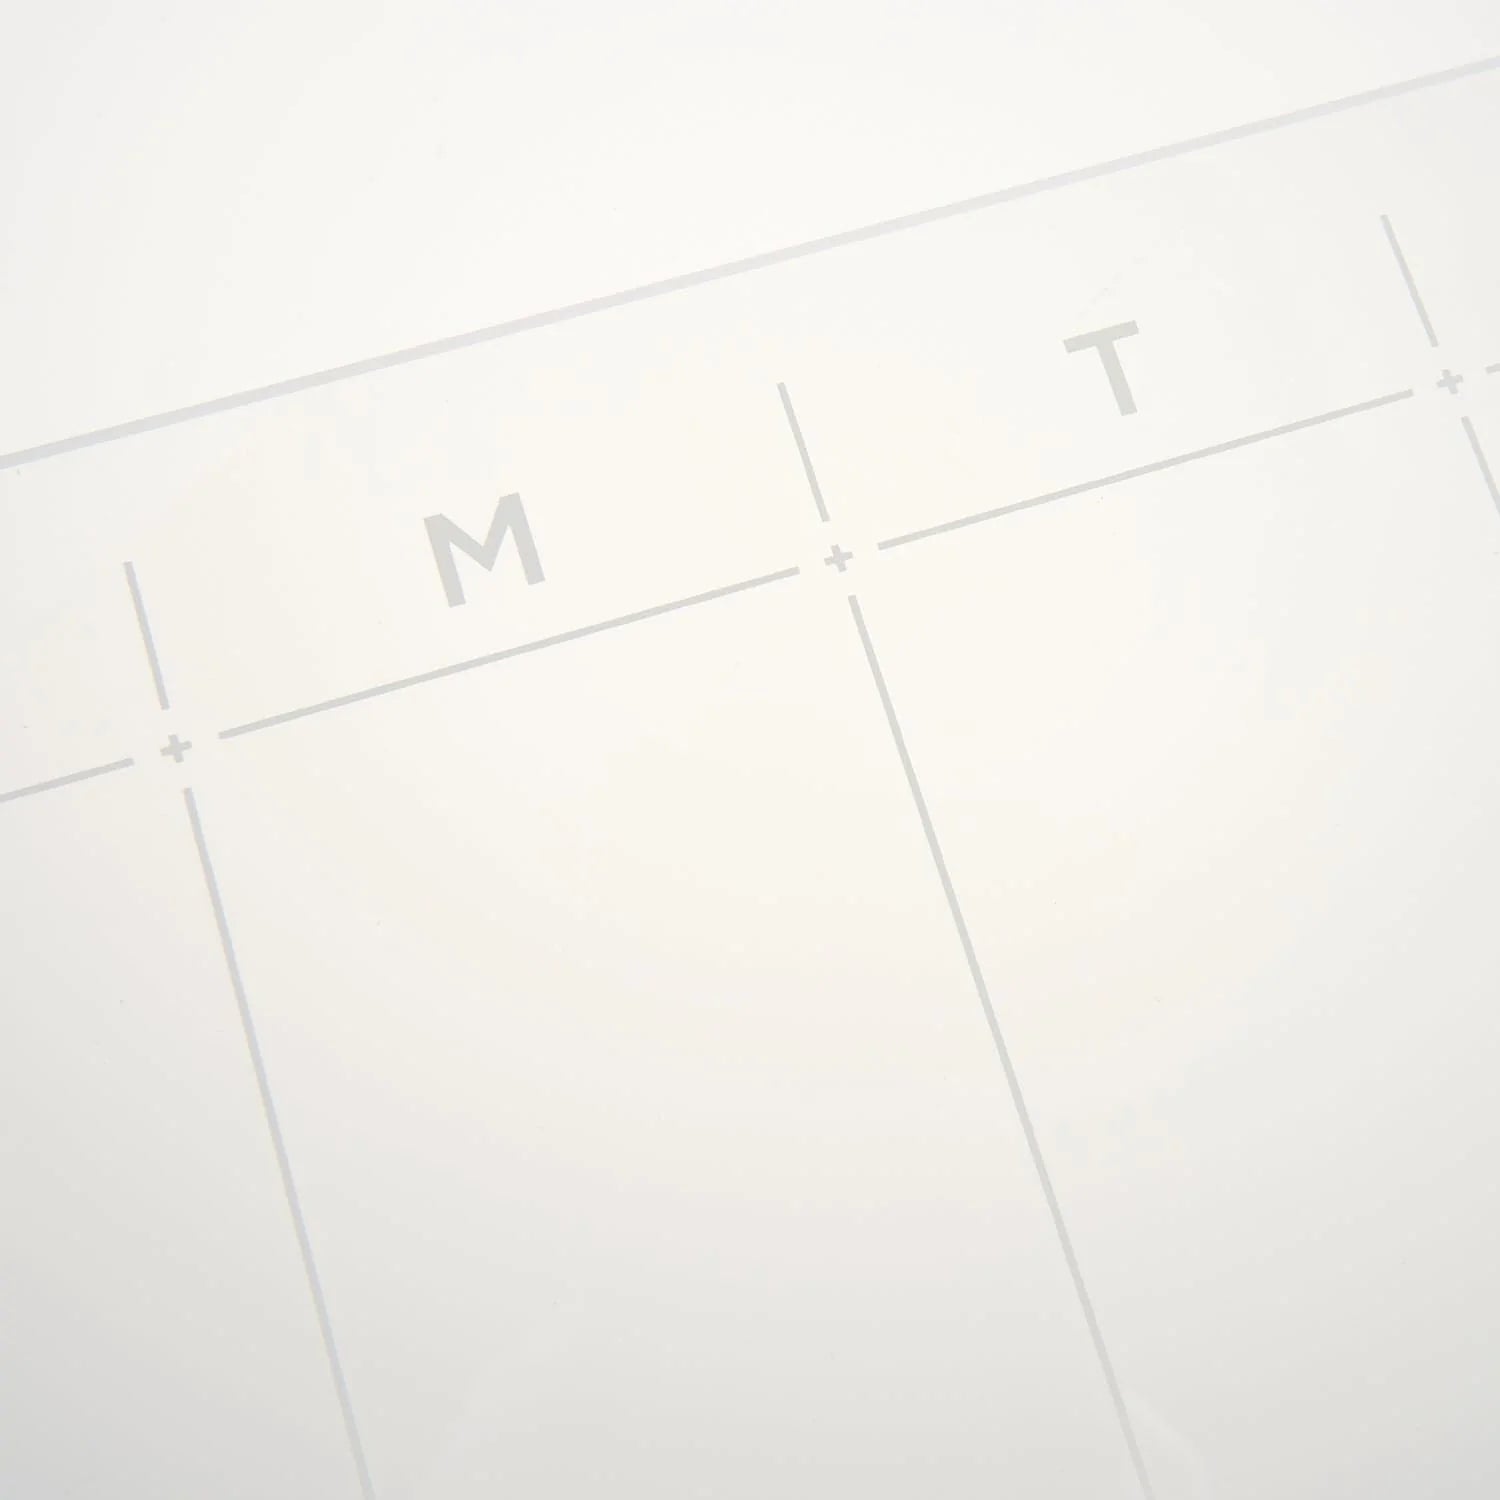  Our Happy Nest Set of 2 Clear Acrylic Calendar for